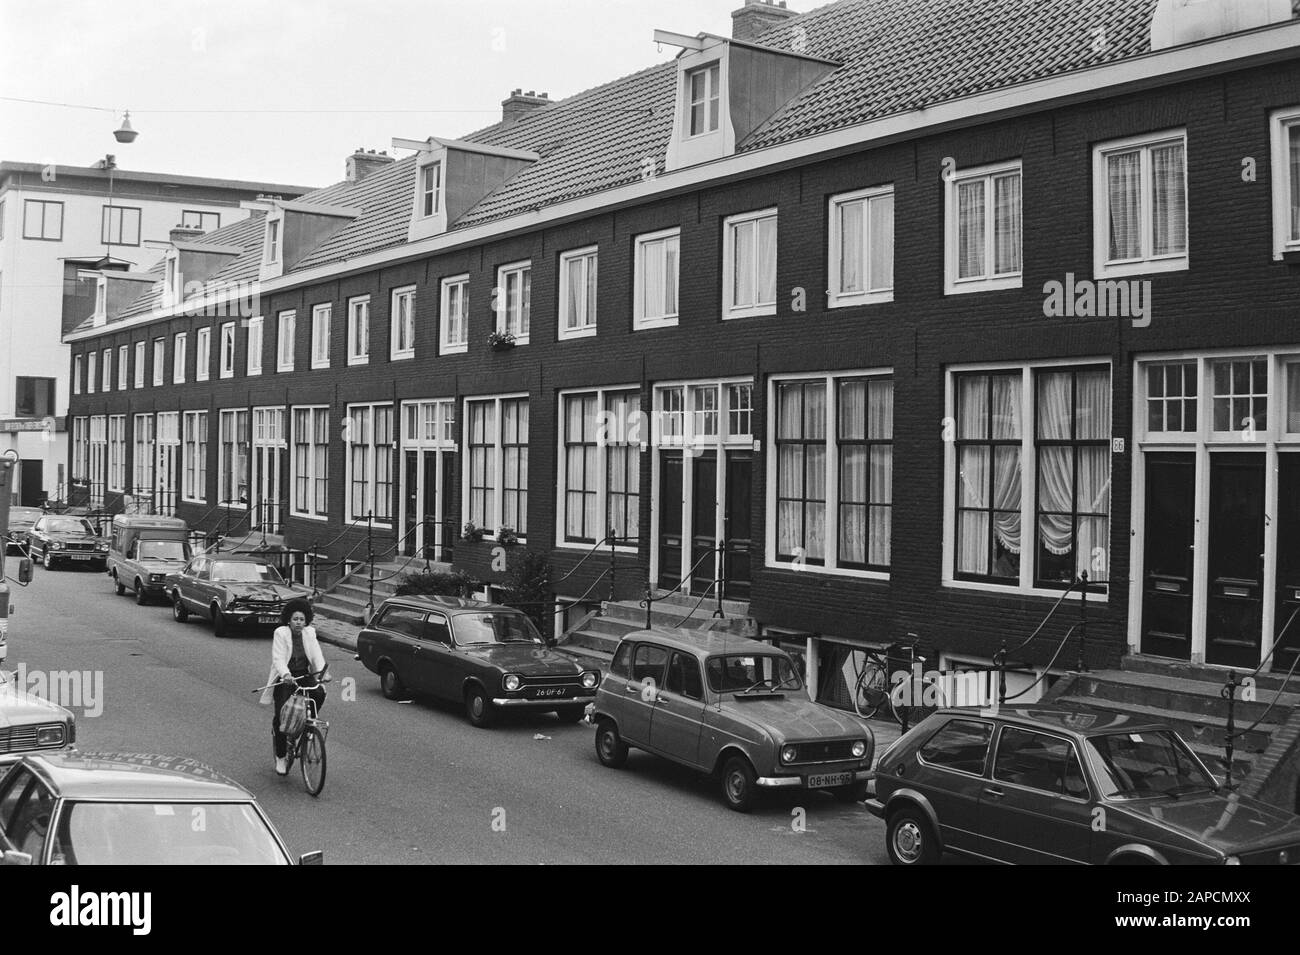 Number of houses already restored at the Hedge Kadijk in Amsterdam that are listed Date: September 1, 1980 Location: Amsterdam, Noord-Holland Keywords: restorations, housing Stock Photo